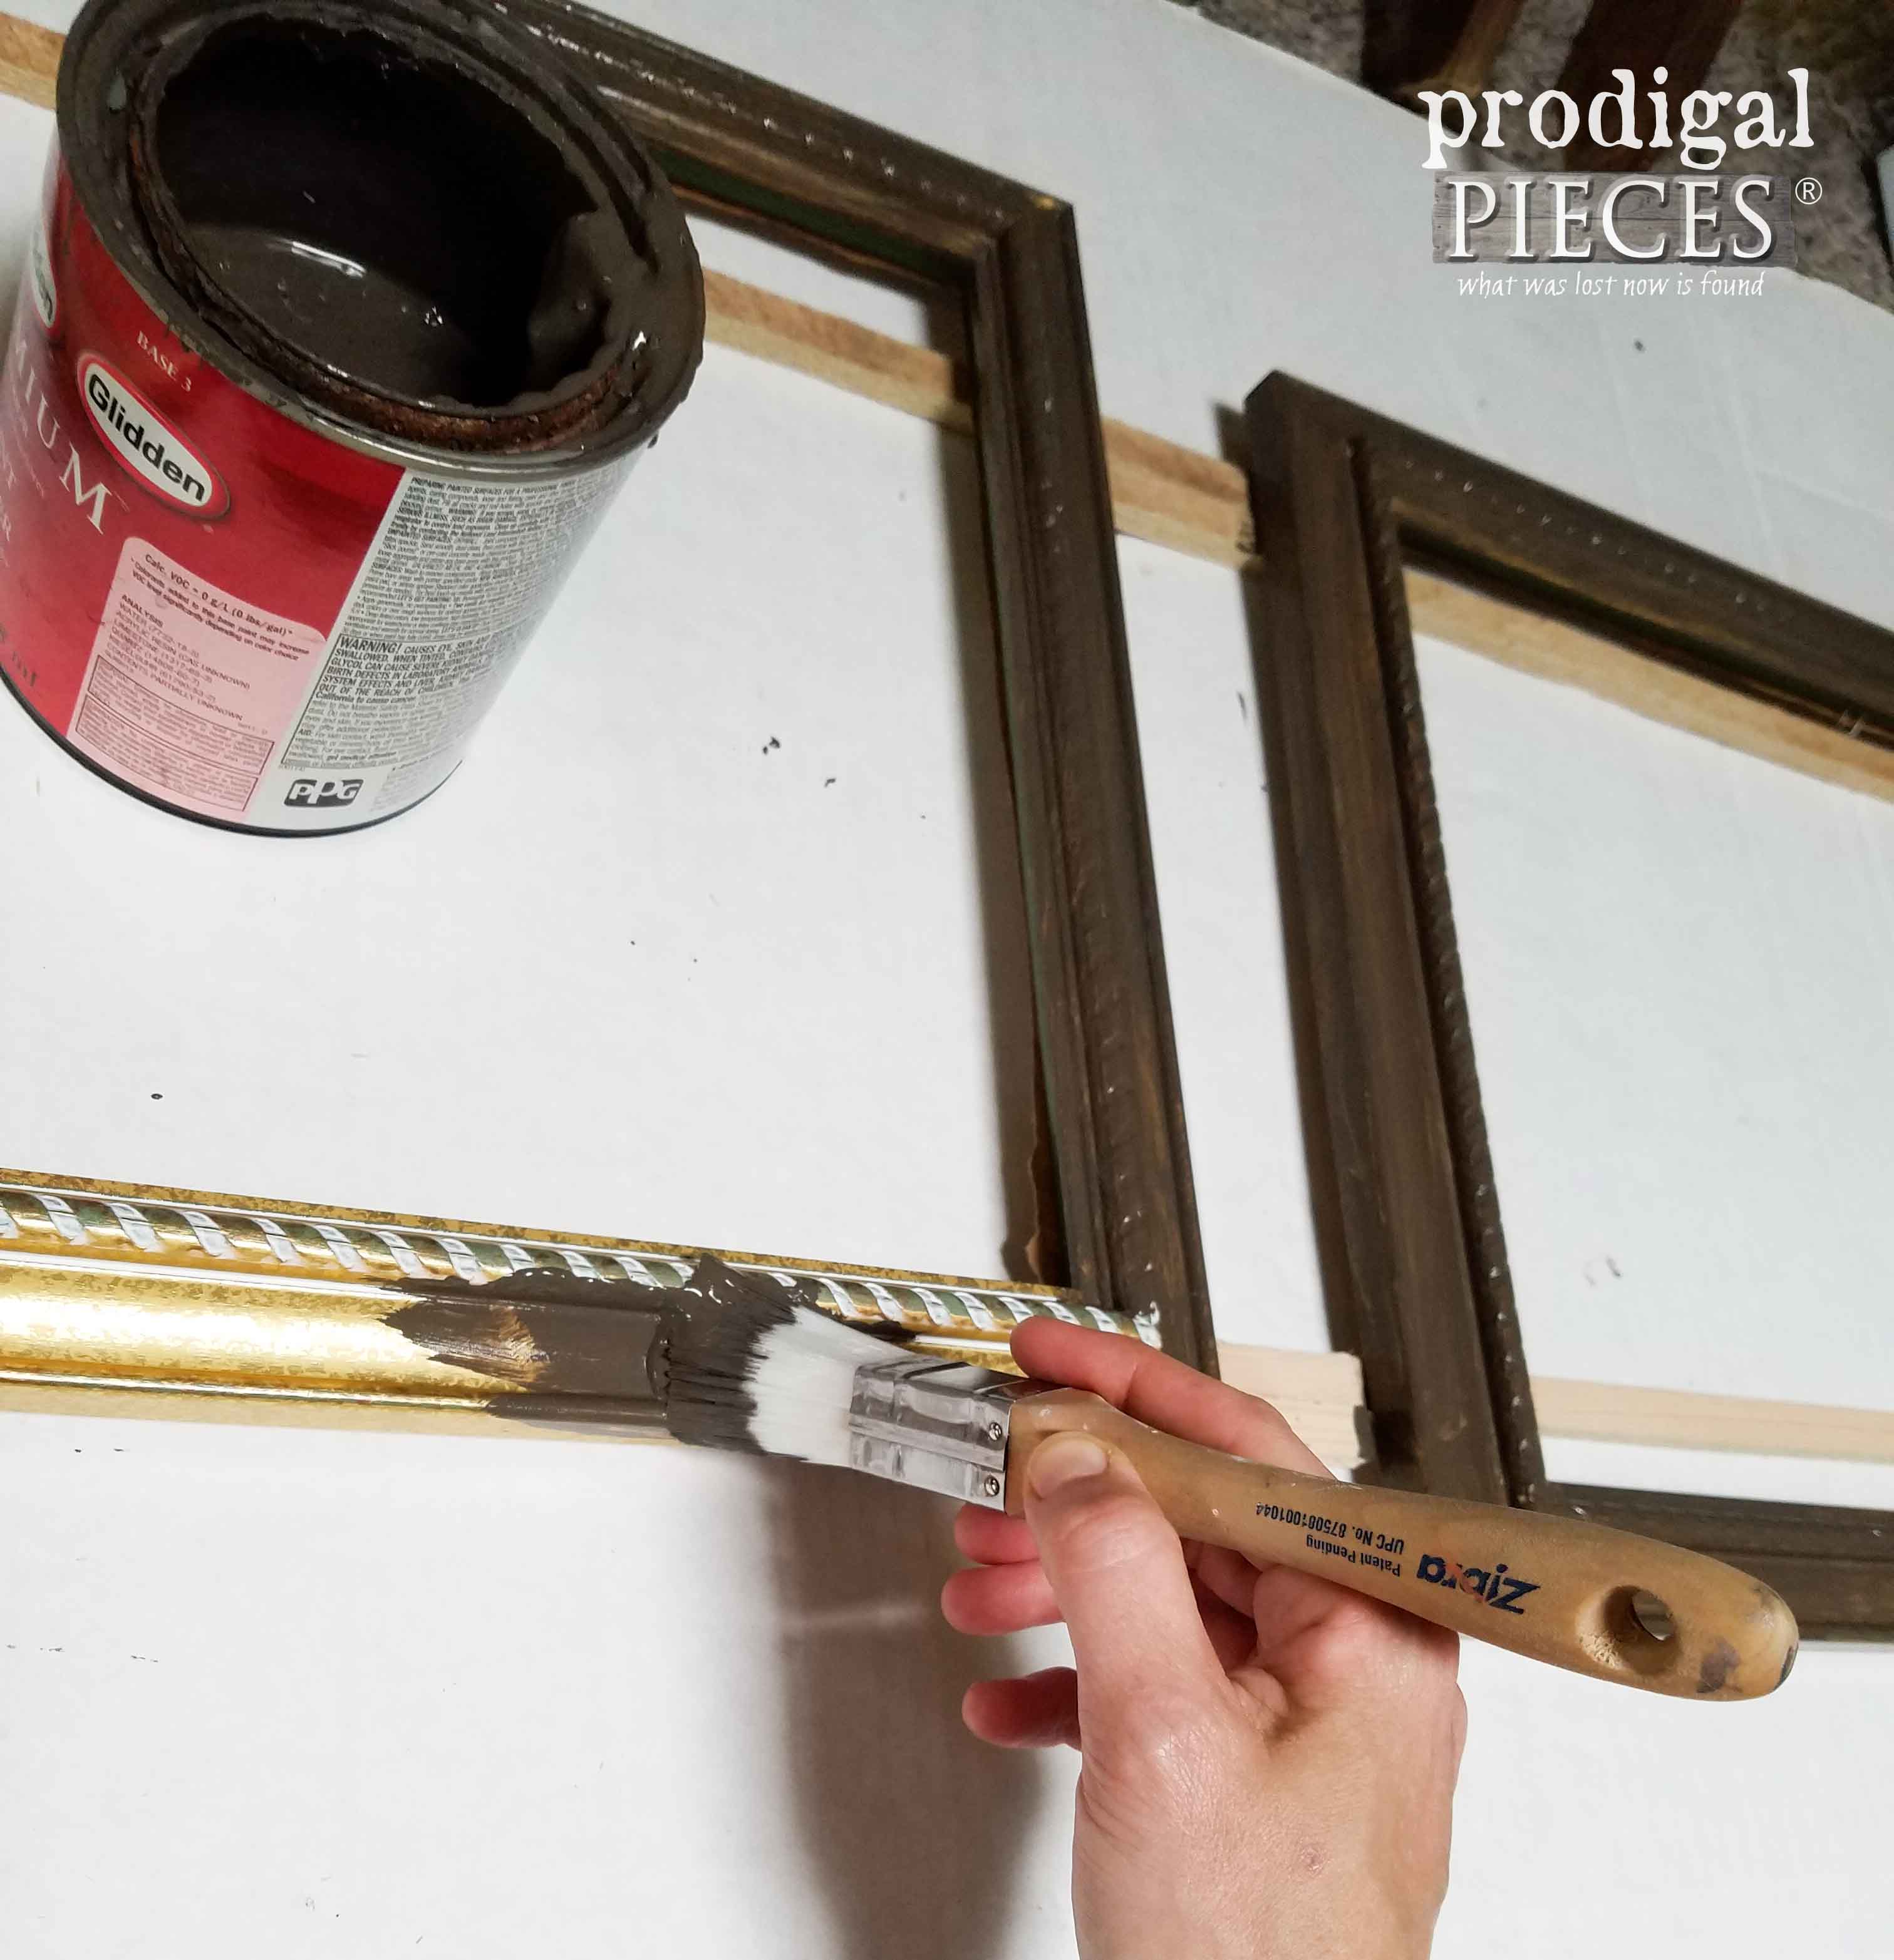 Painting Frames for Doily Art by Prodigal Pieces | prodigalpieces.com